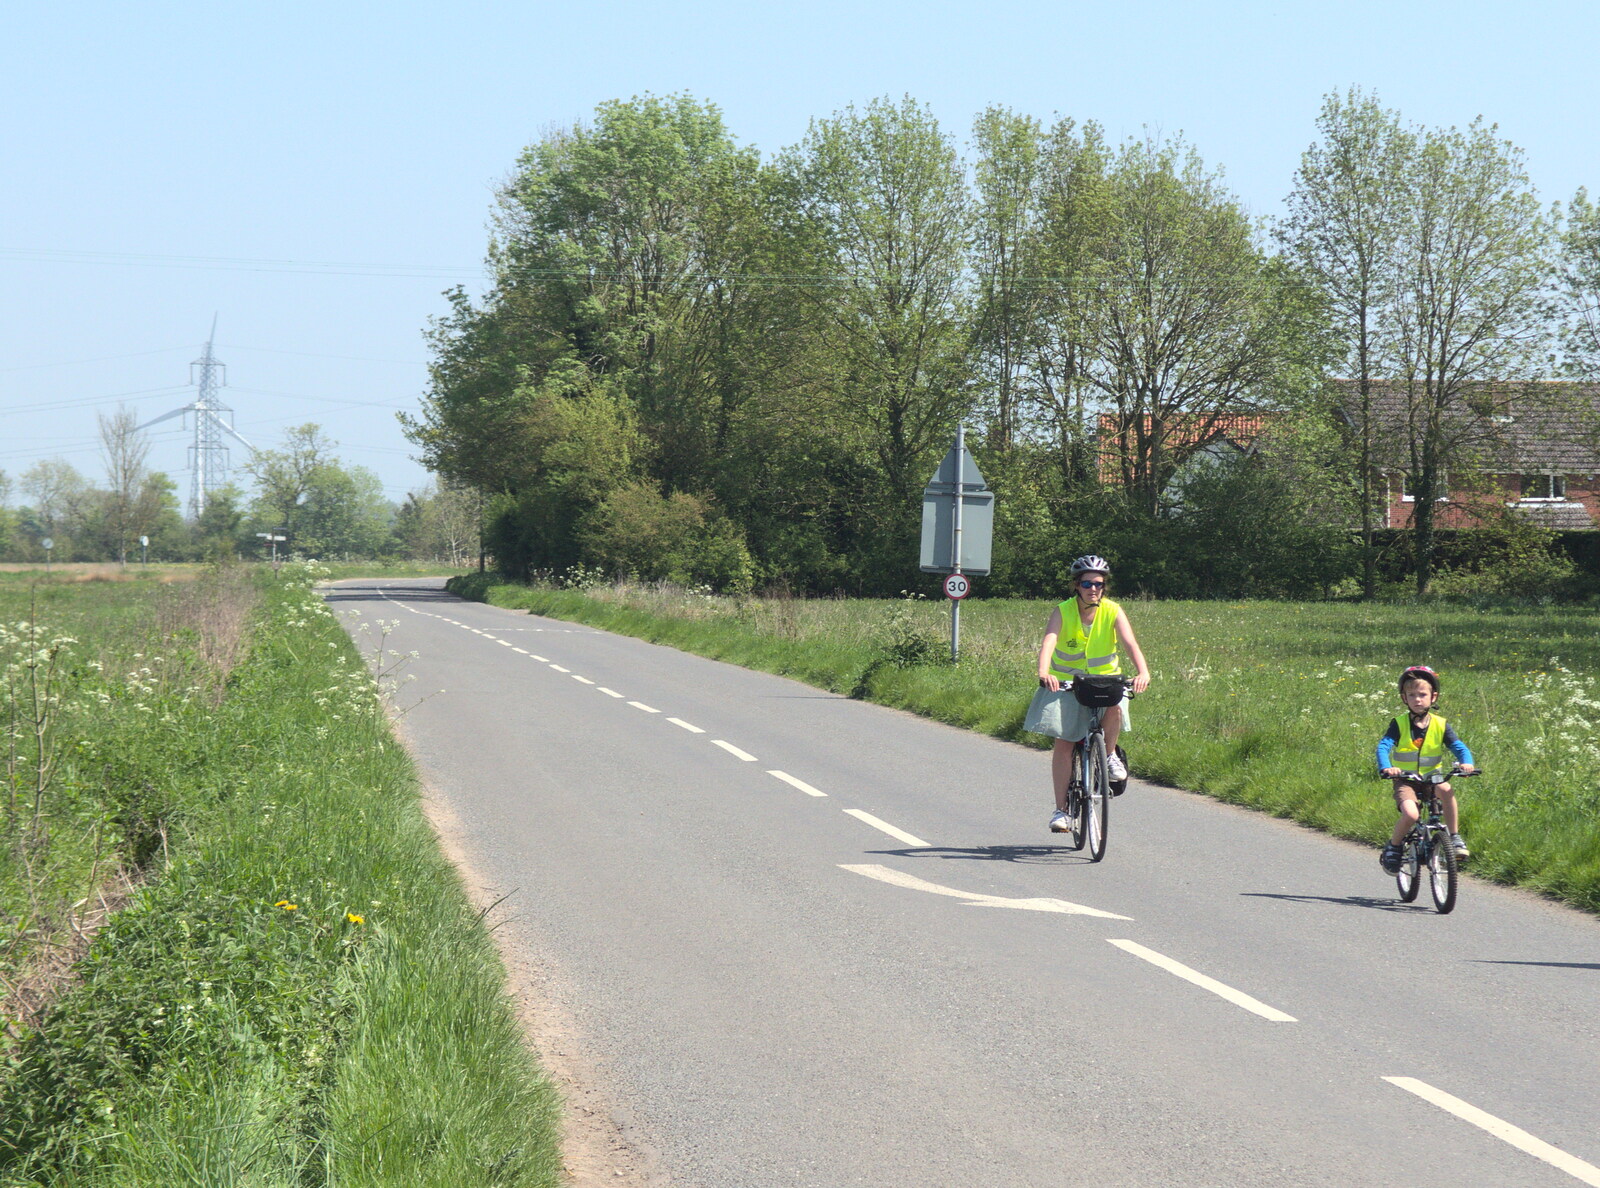 Isobel and Harry cycle up to the Mellis Railway from A Bike Ride to the Railway Tavern, Mellis, Suffolk - 7th May 2018